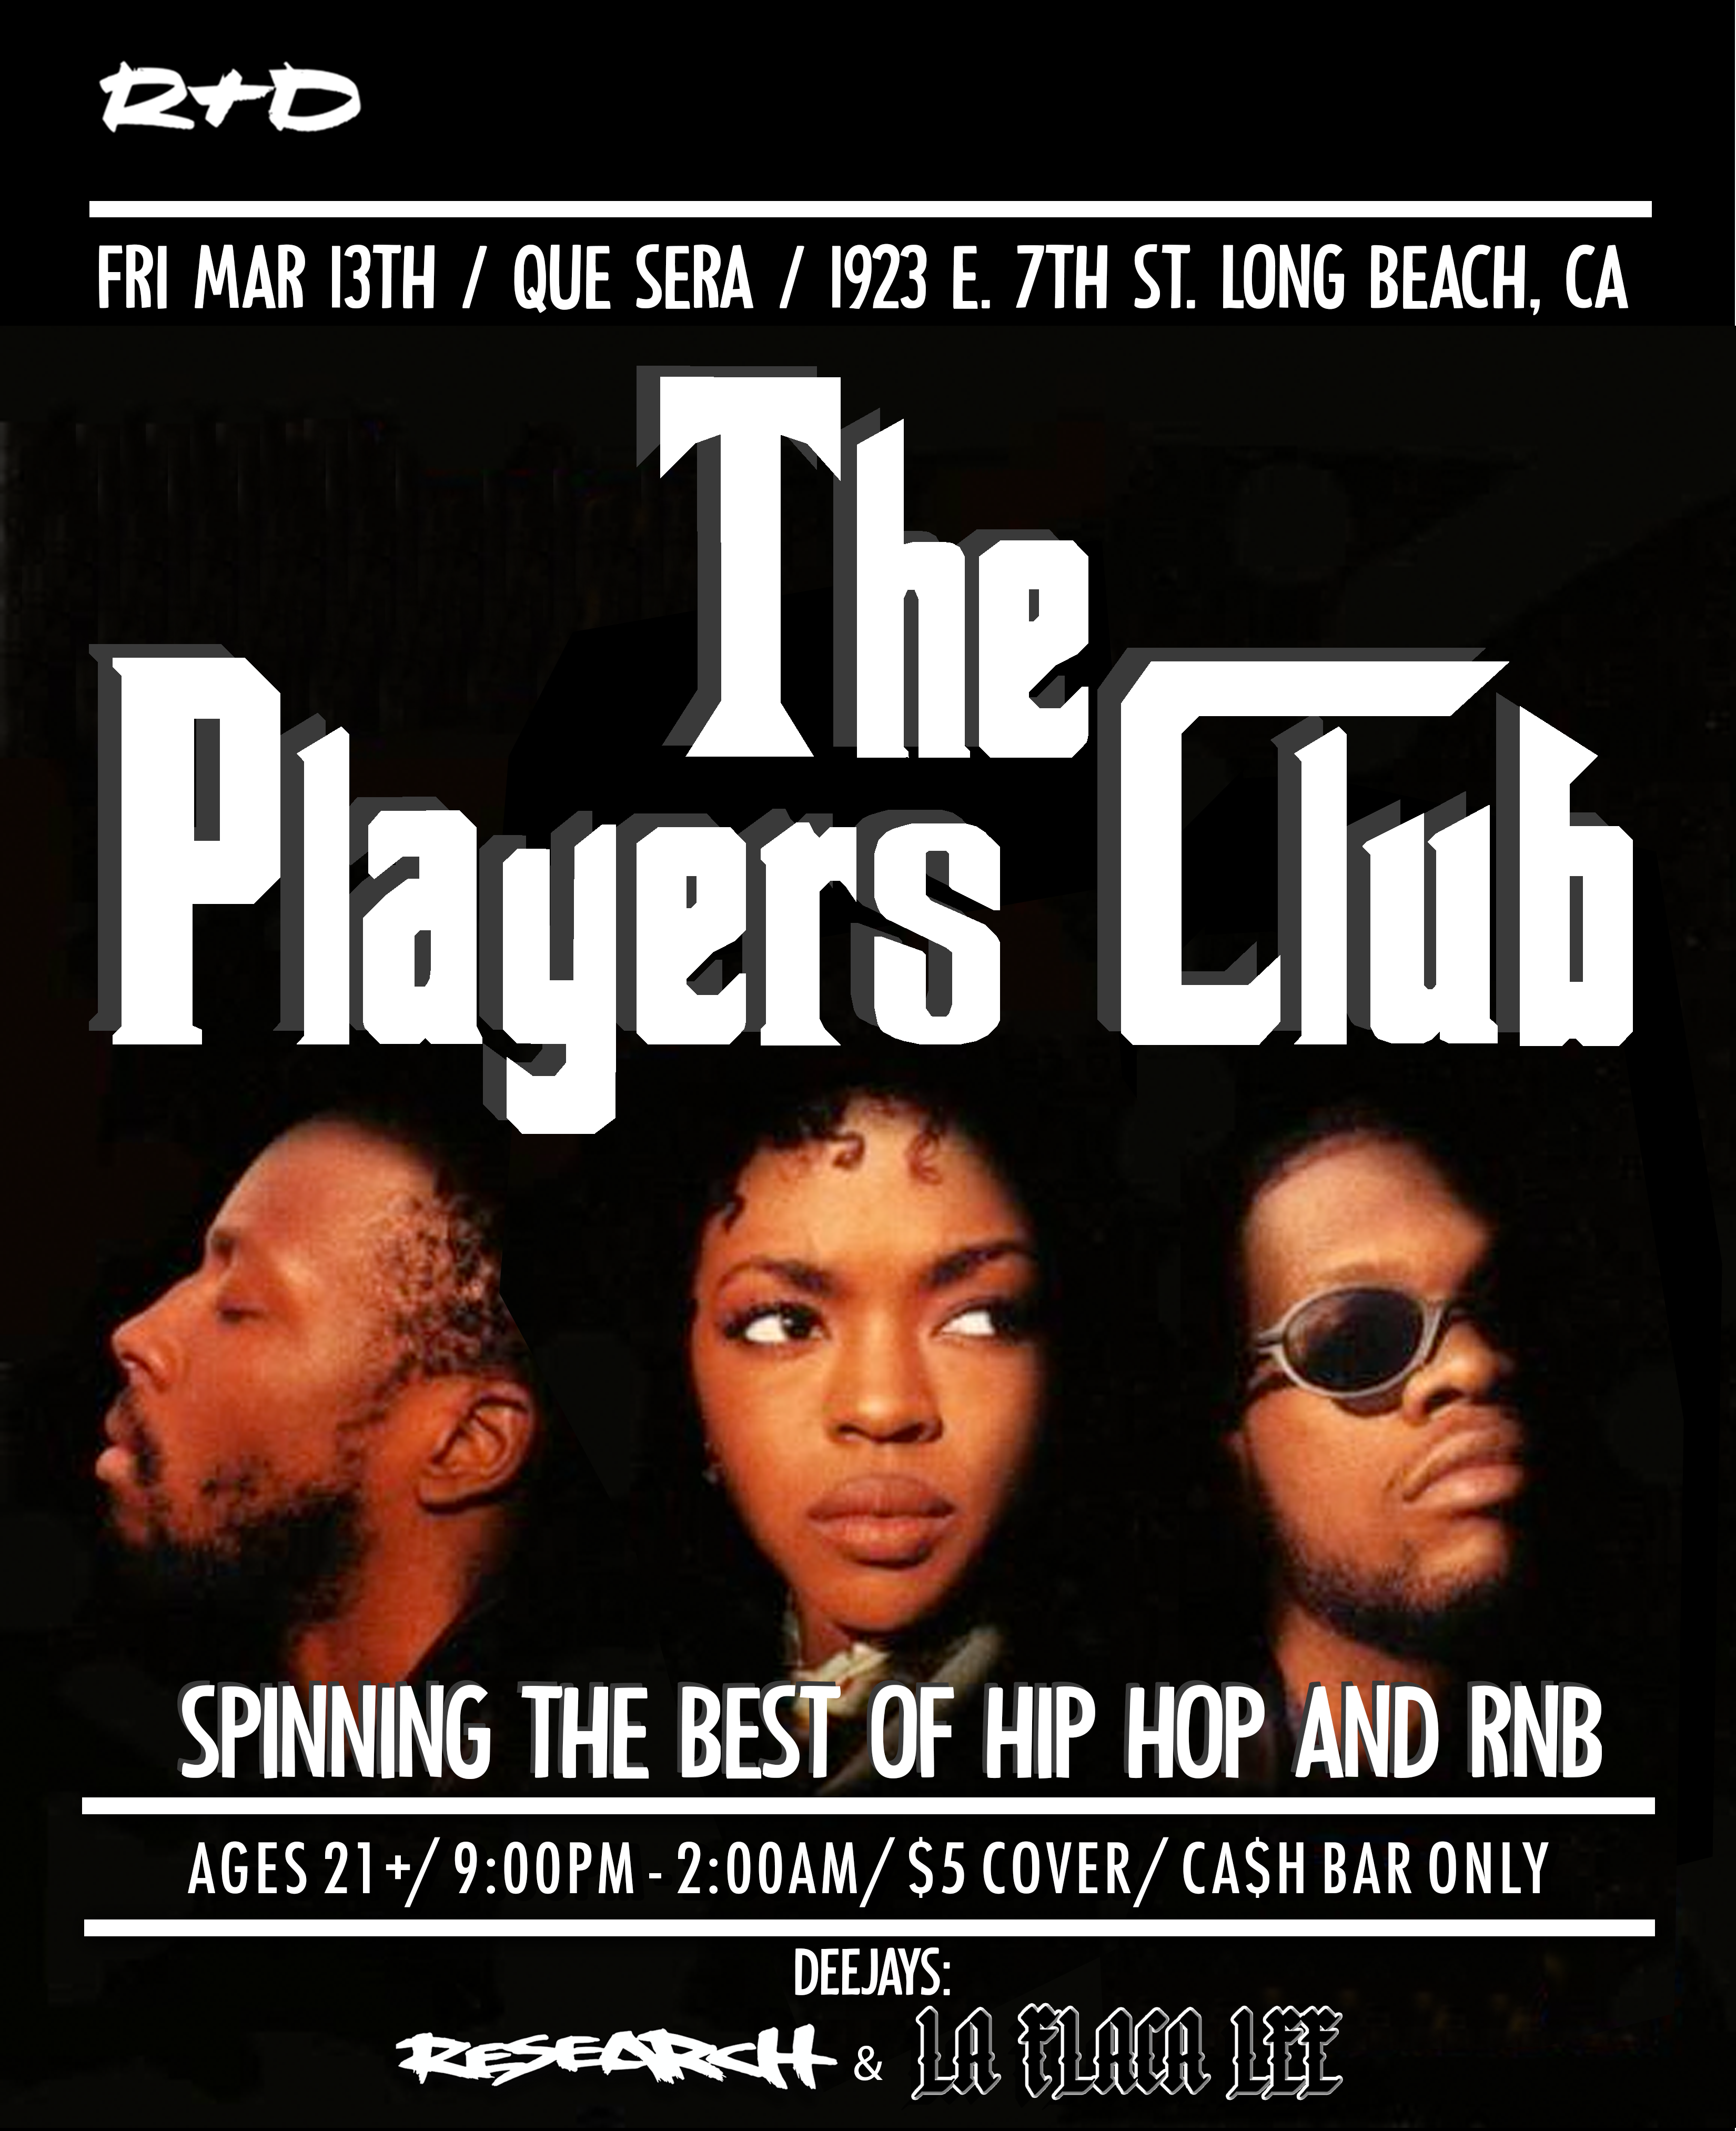 Players Club Early 2000s / 90s RnB & Hip Hop Party in Long Beach